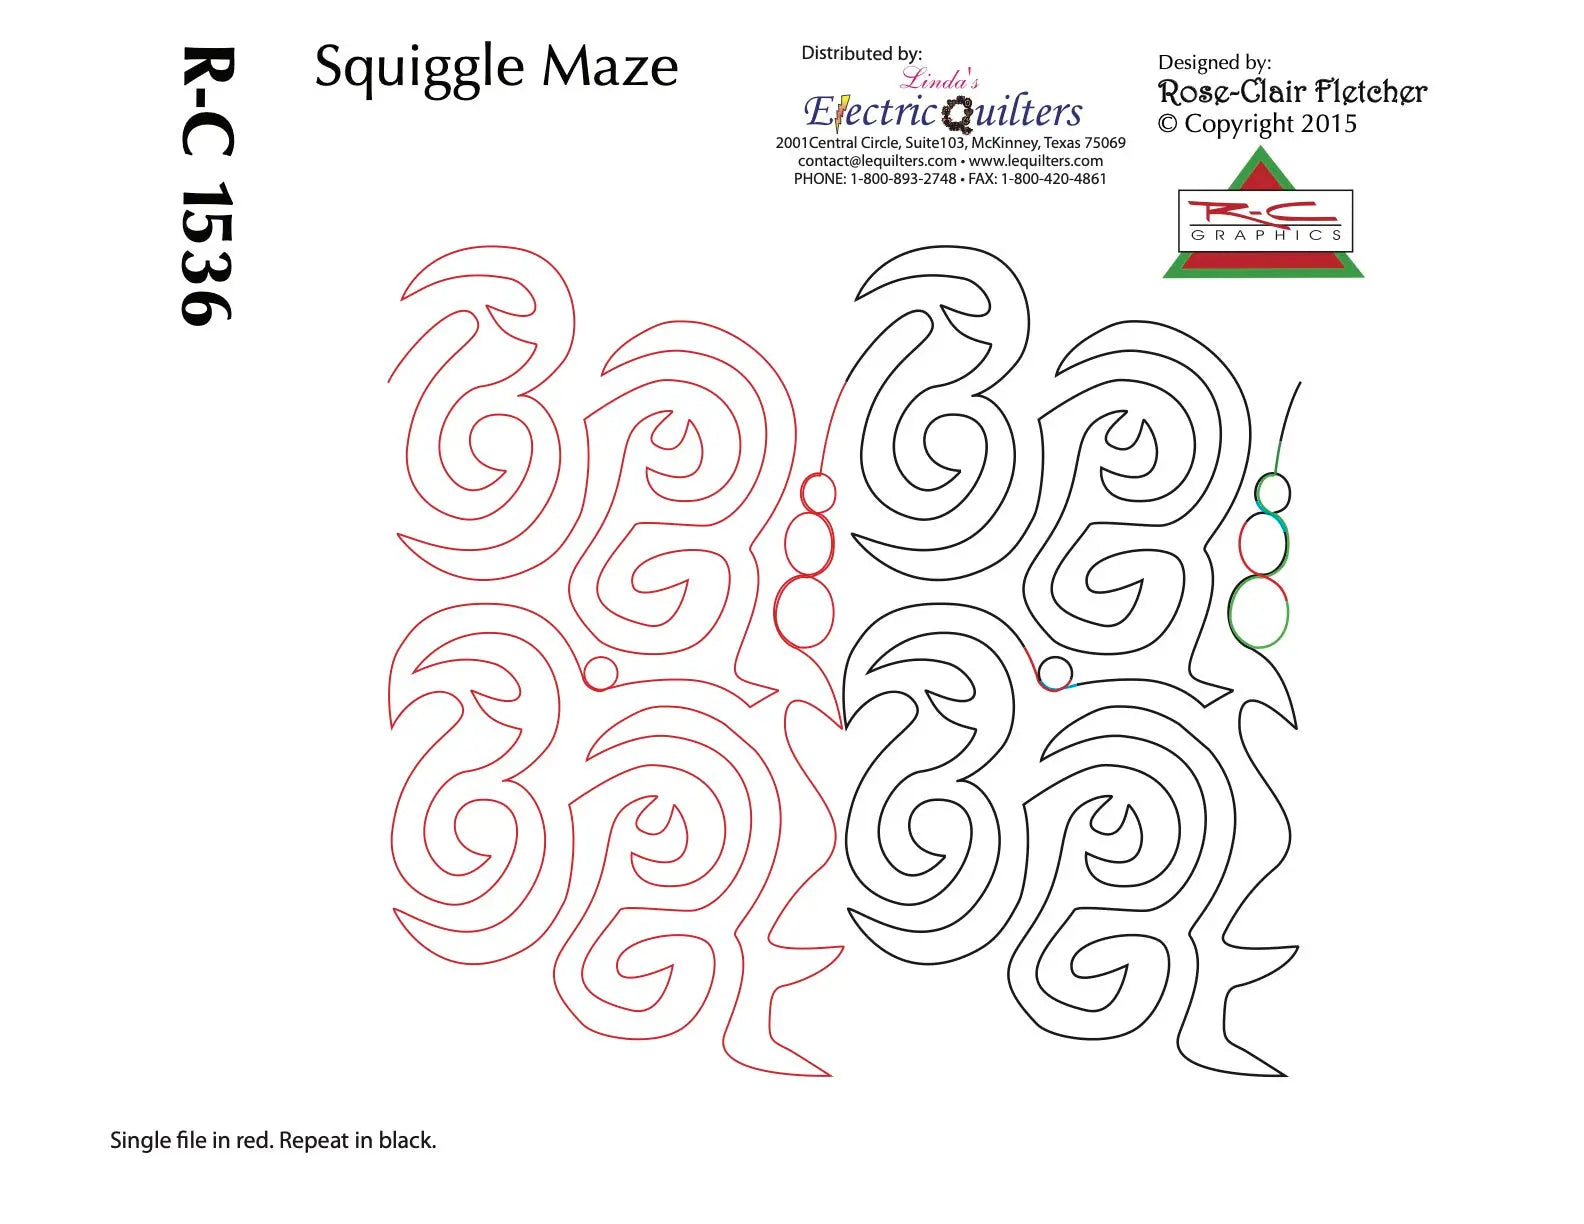 1536 Squiggle Maze Pantograph by Rose-Clair Fletcher - Linda's Electric Quilters